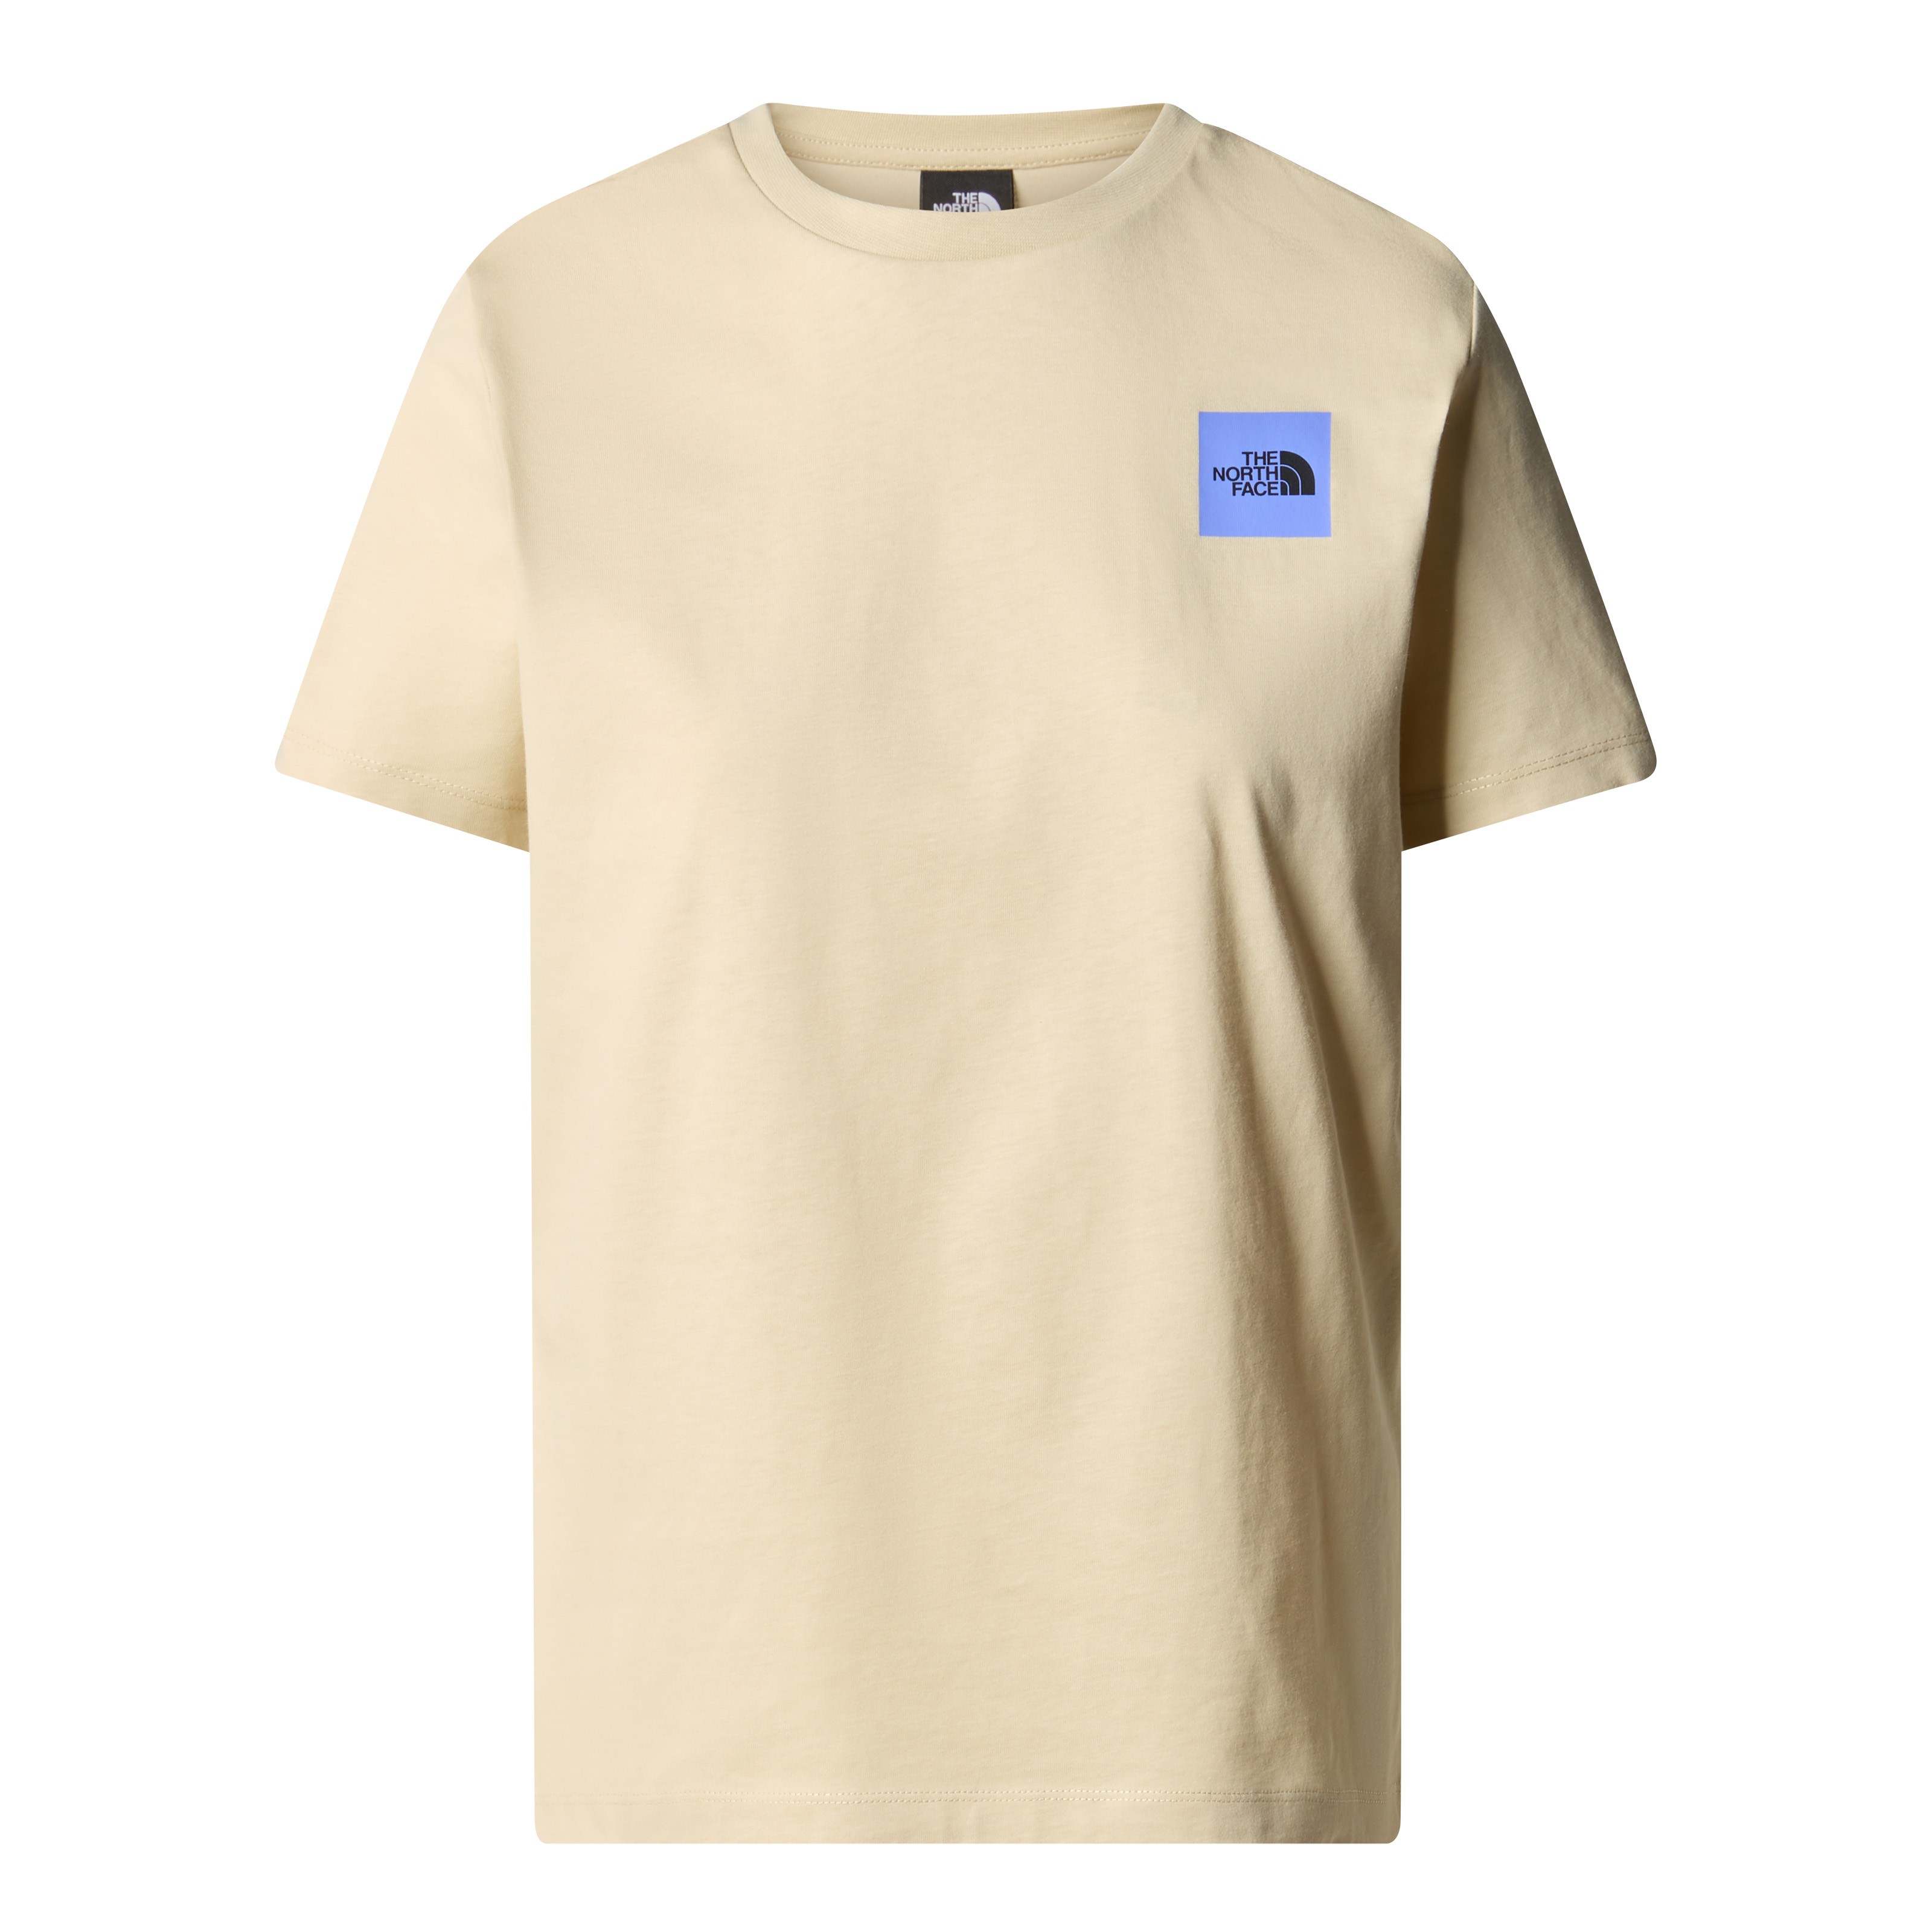 The North Face  T-shirt Coordinates Beige